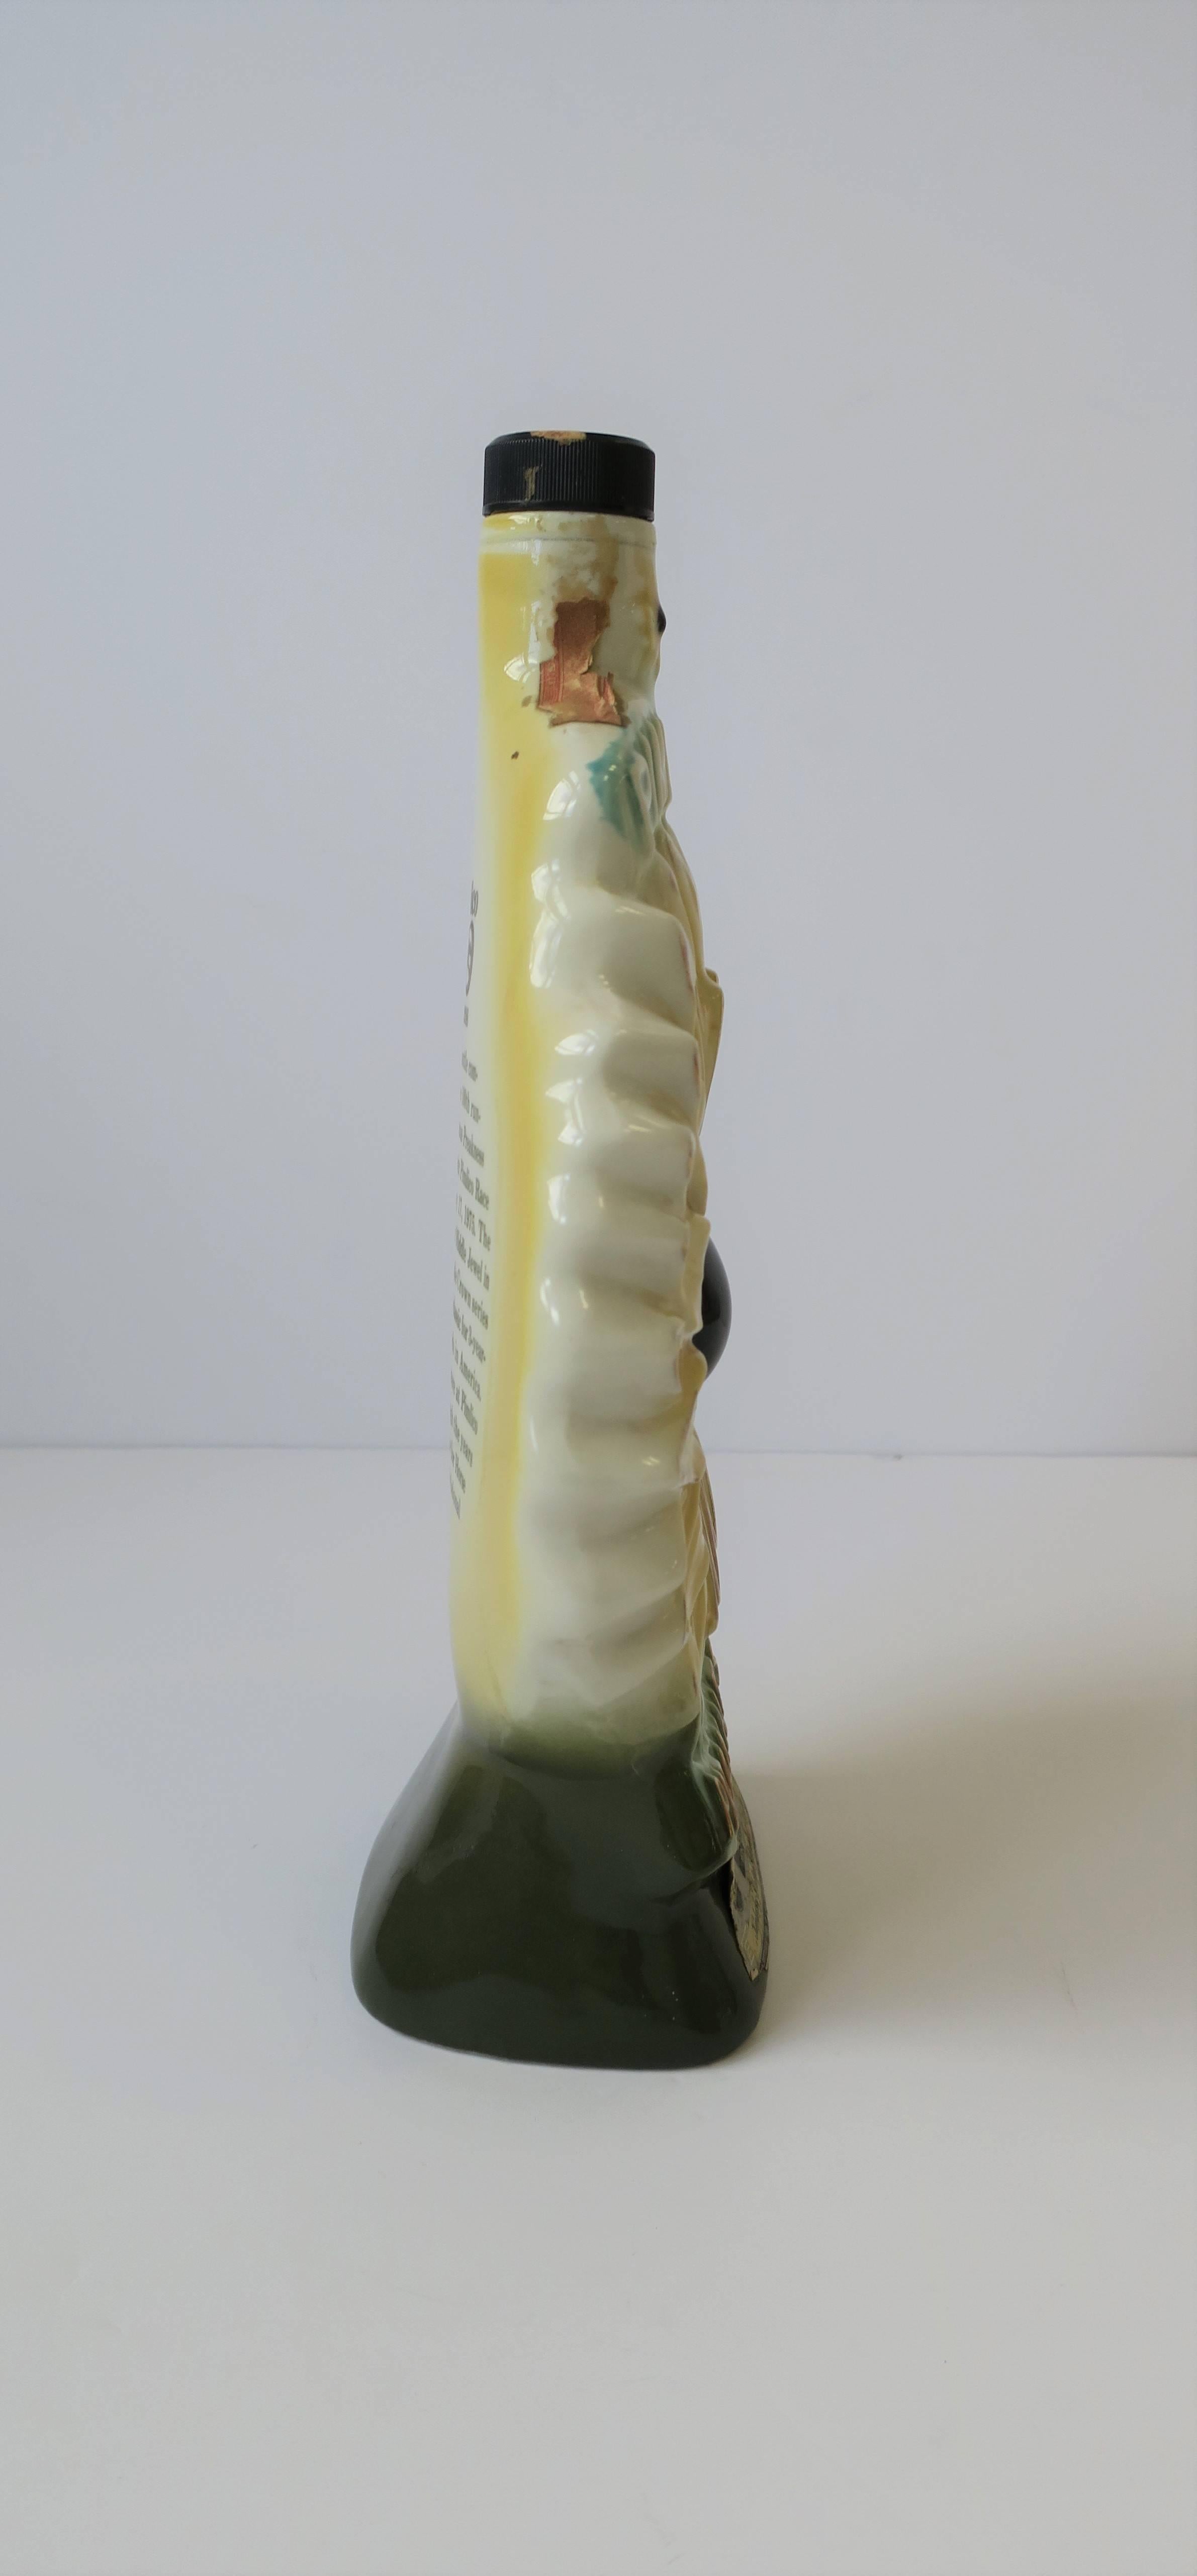 Vintage Horse Racing Preakness Stakes Decanter Liquor or Spirits Bottle, 1975 1